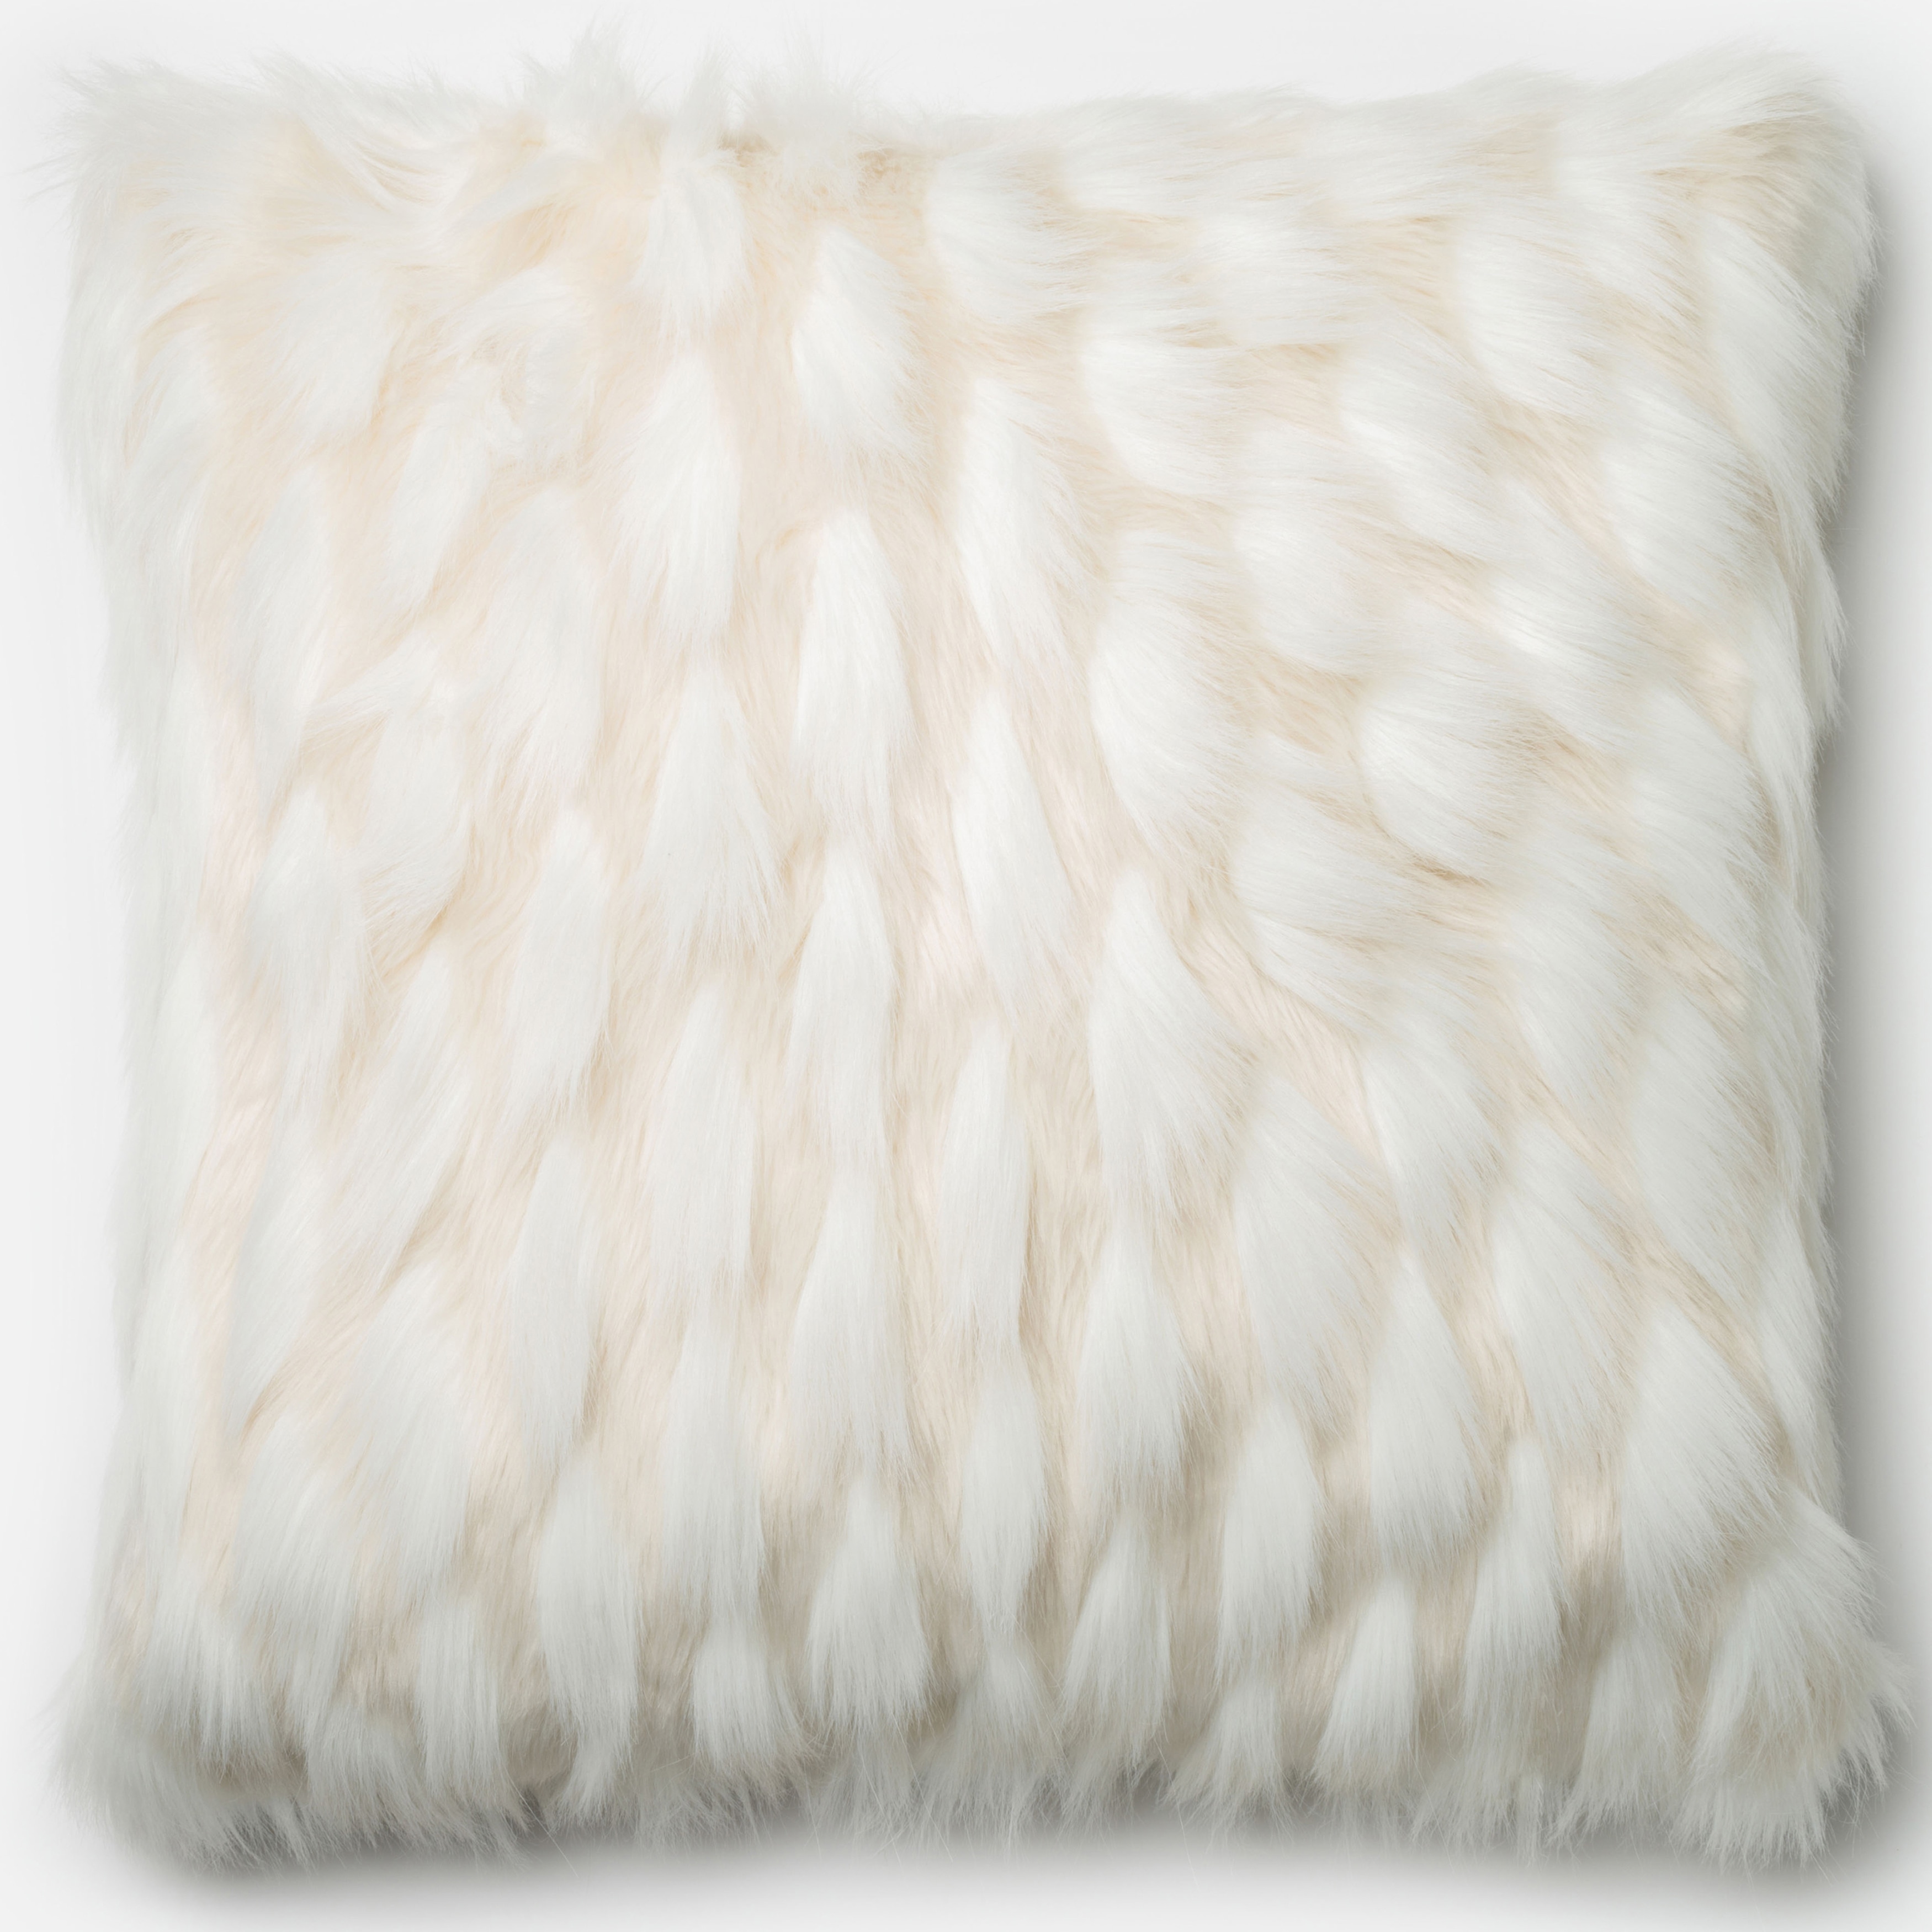 Faux Fur White Textured 22 Inch Throw Pillow Or Pillow Cover On Sale Overstock 10594954